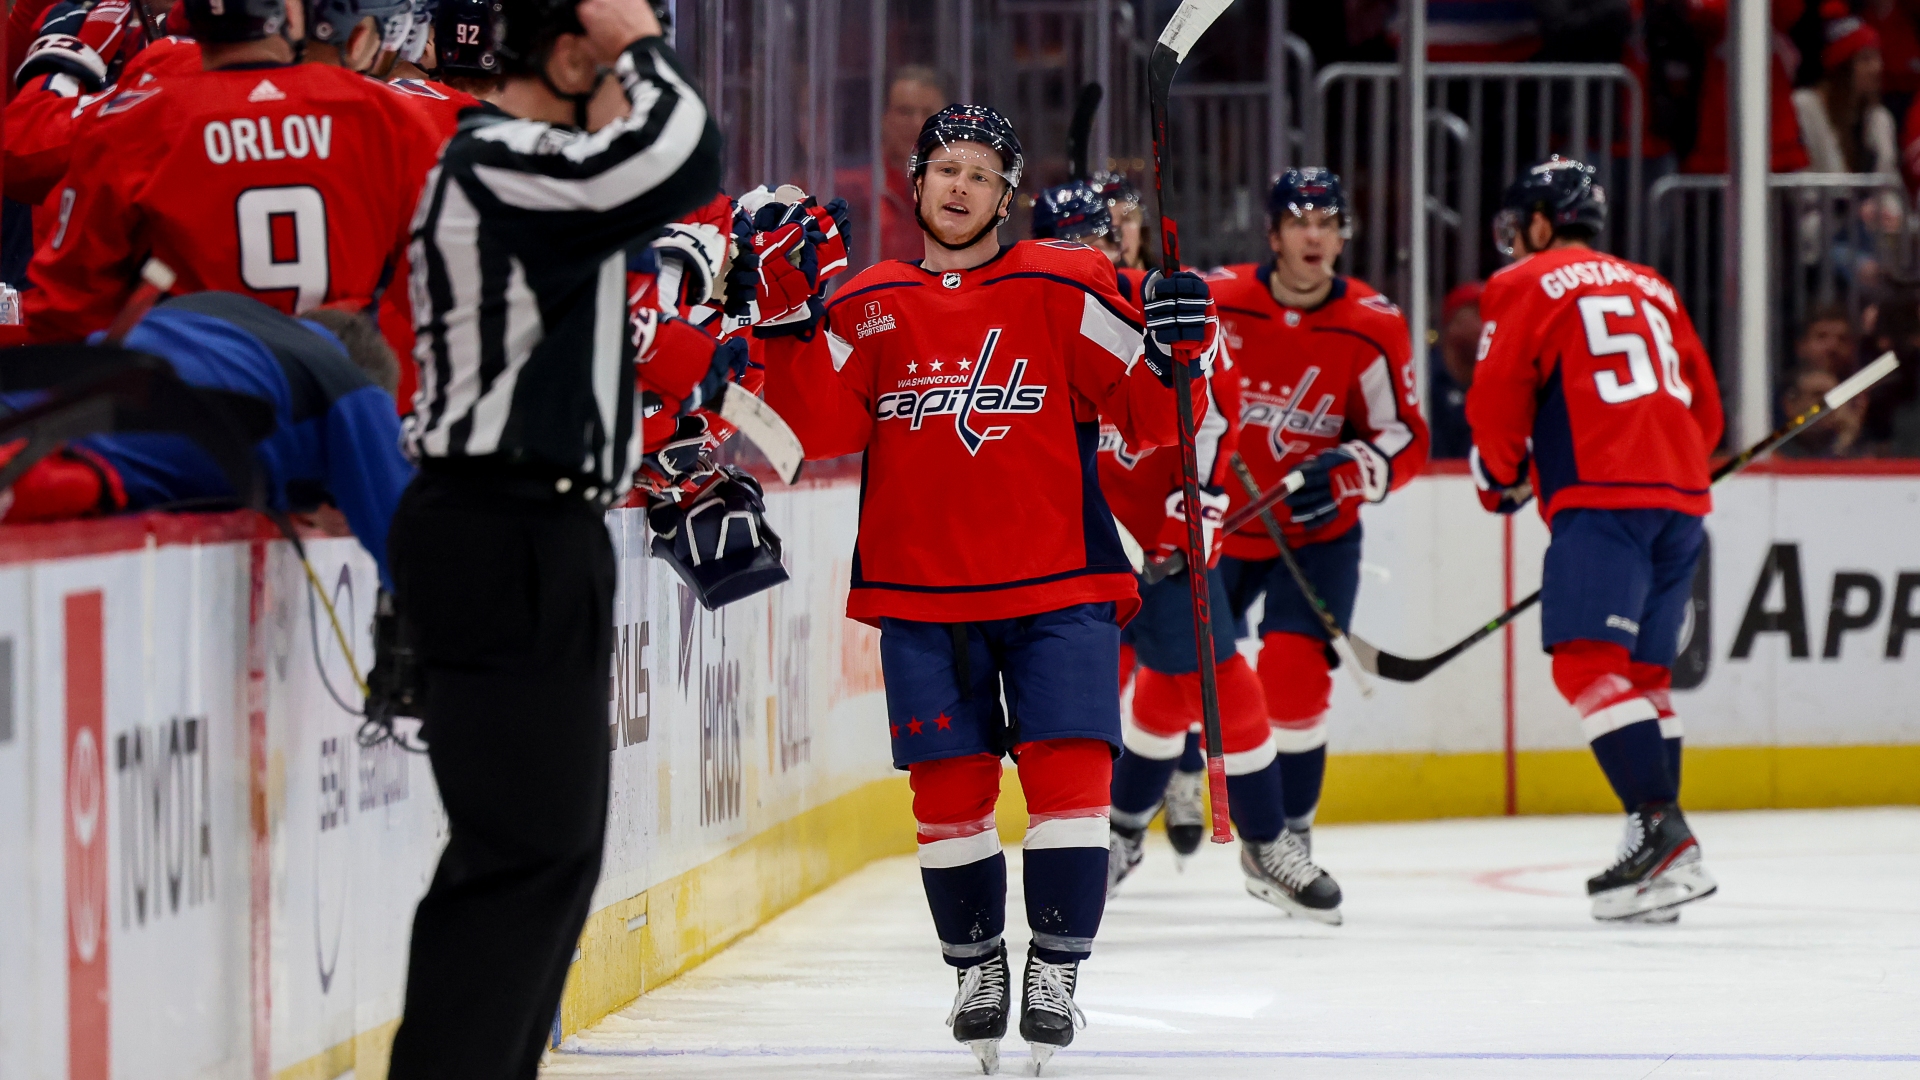 Capitals left wing Joe Snively celebrates scoring a goal against the Hurricanes